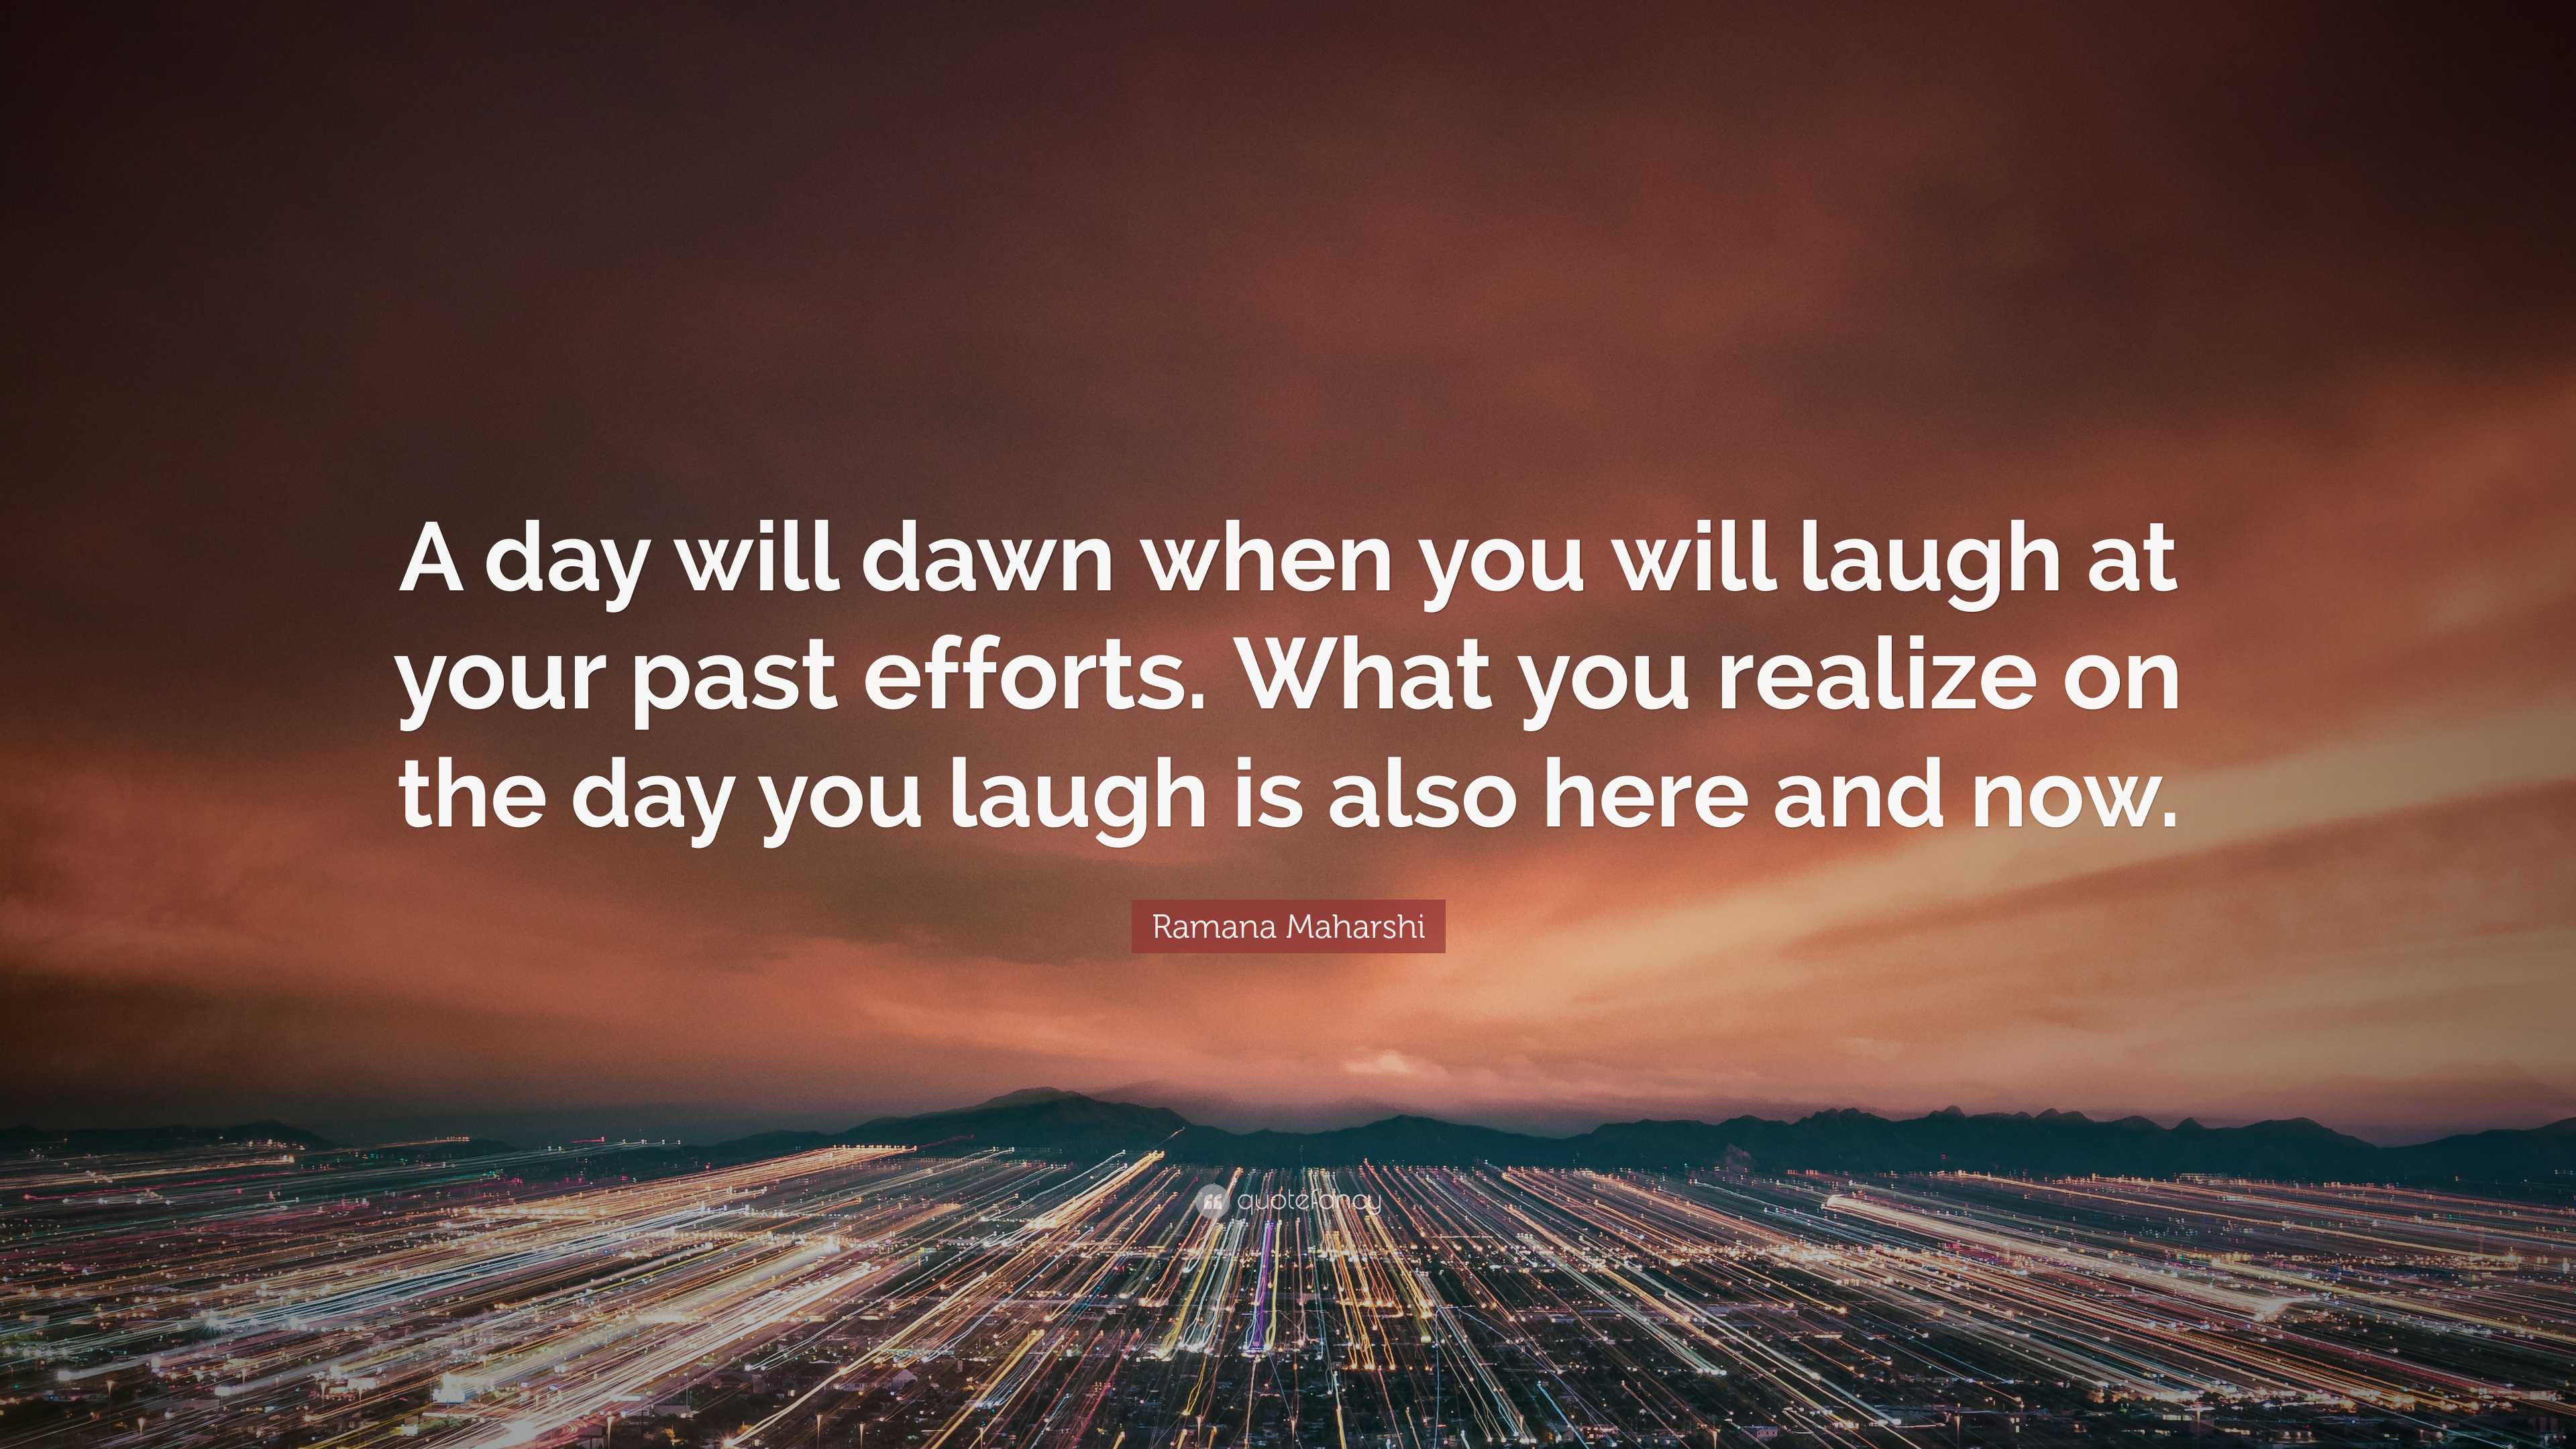 Ramana Maharshi Quote: “A day will dawn when you will laugh at your ...